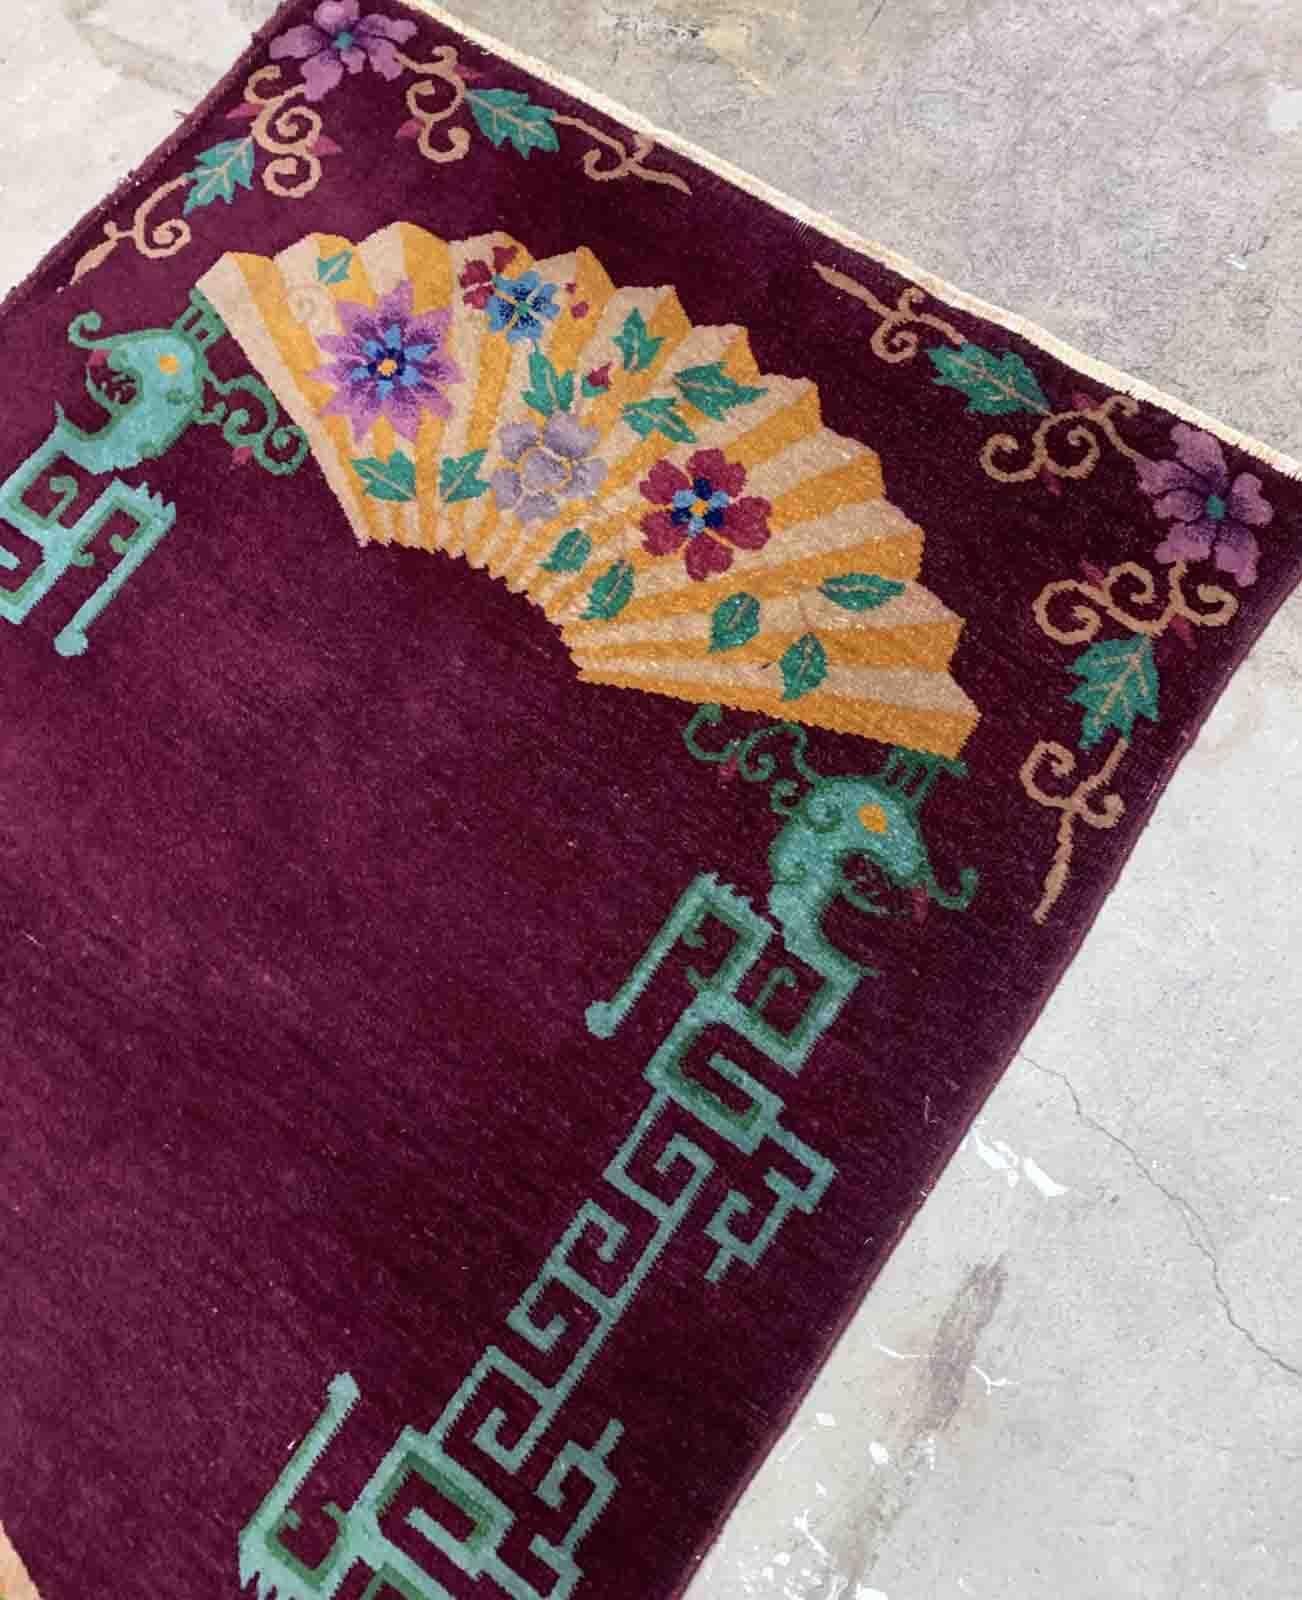 Handmade antique Art Deco Chinese rug in purple shade and very unusual design. The rug is from the beginning of 20th century in original good condition. 

-condition: original good,

-circa: 1920s,

-size: 3.1' x 4.10' (94cm x